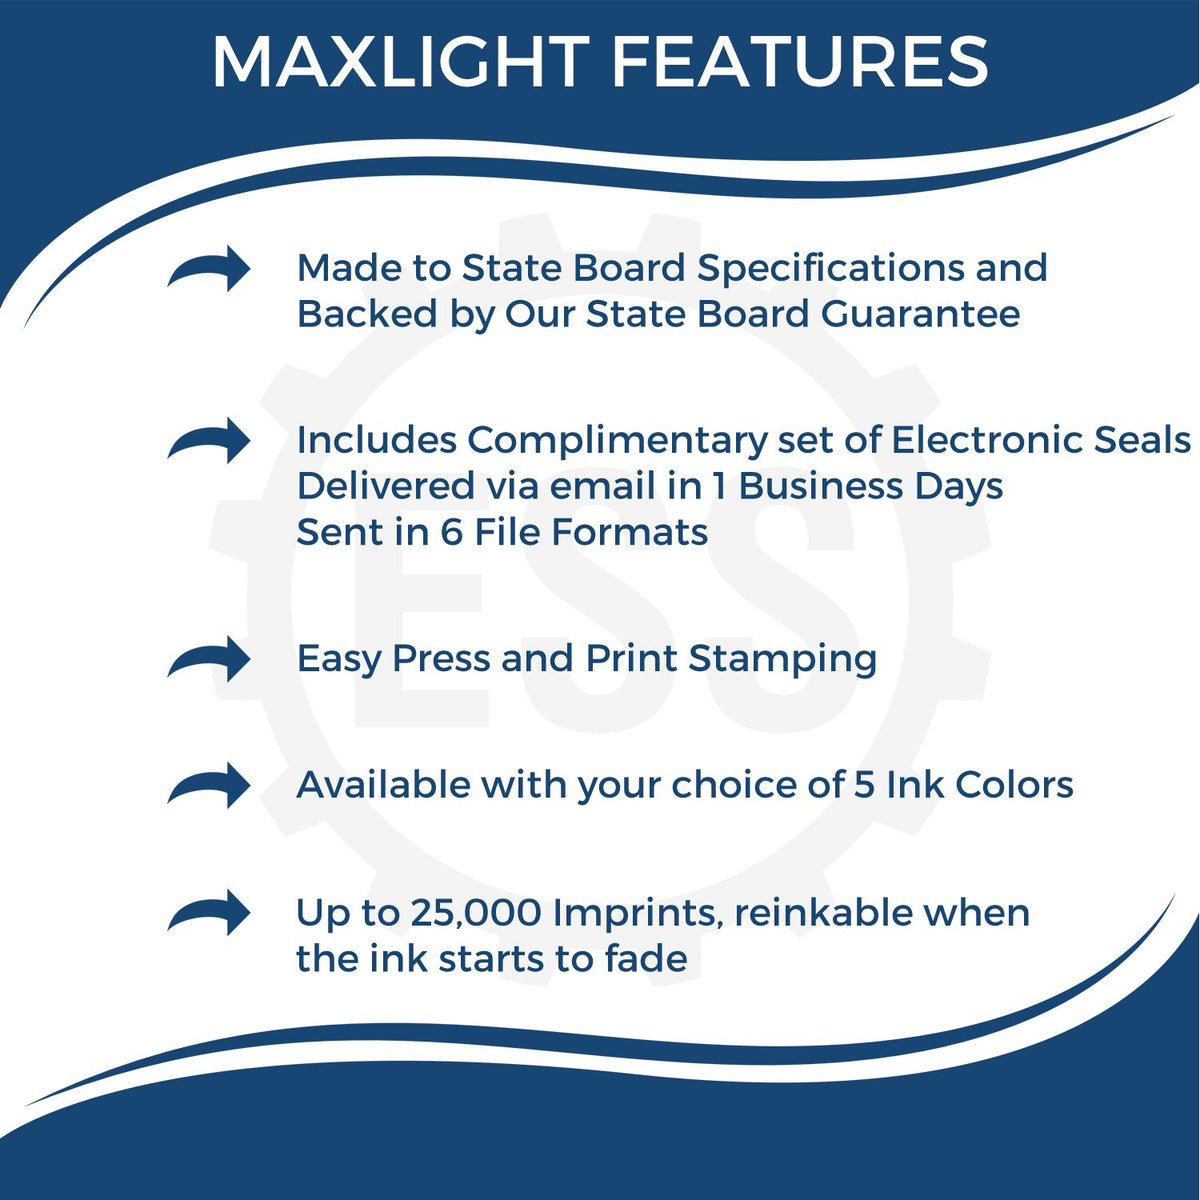 A picture of an infographic highlighting the selling points for the Premium MaxLight Pre-Inked Michigan Geology Stamp